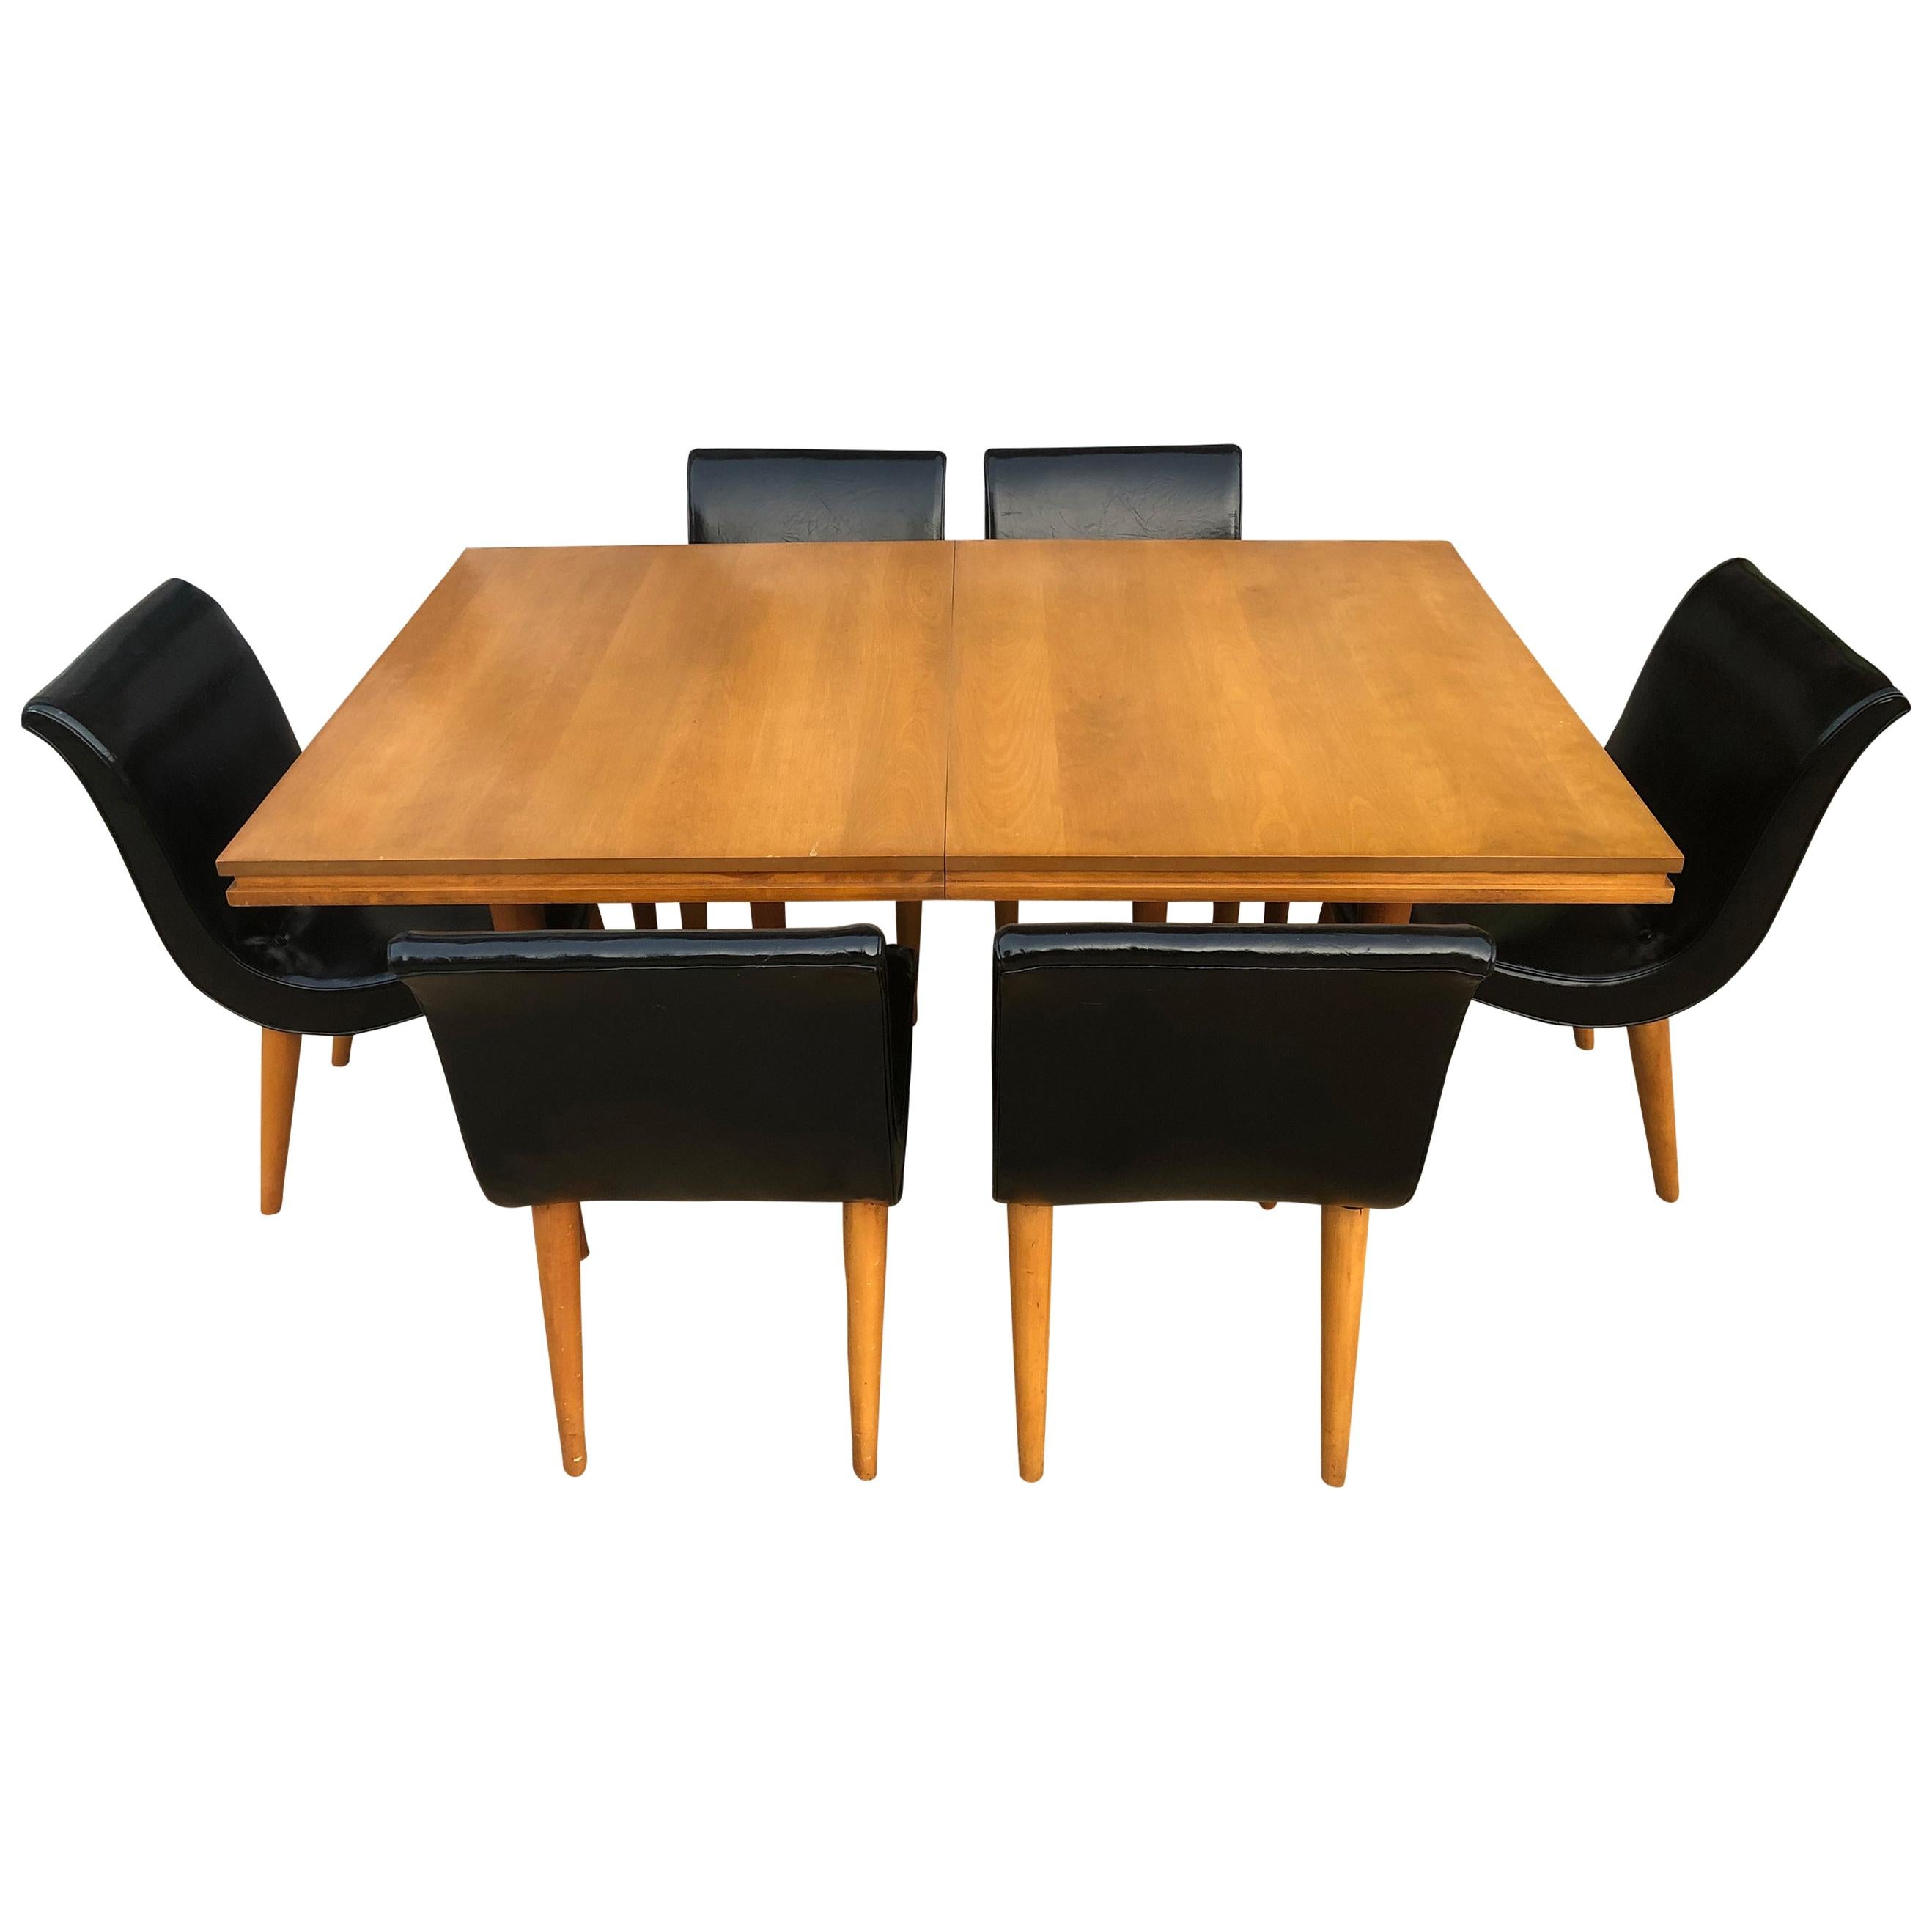 Unique Rare Russel Wright Maple Dining Table Set with 6 Black Scoop Chairs